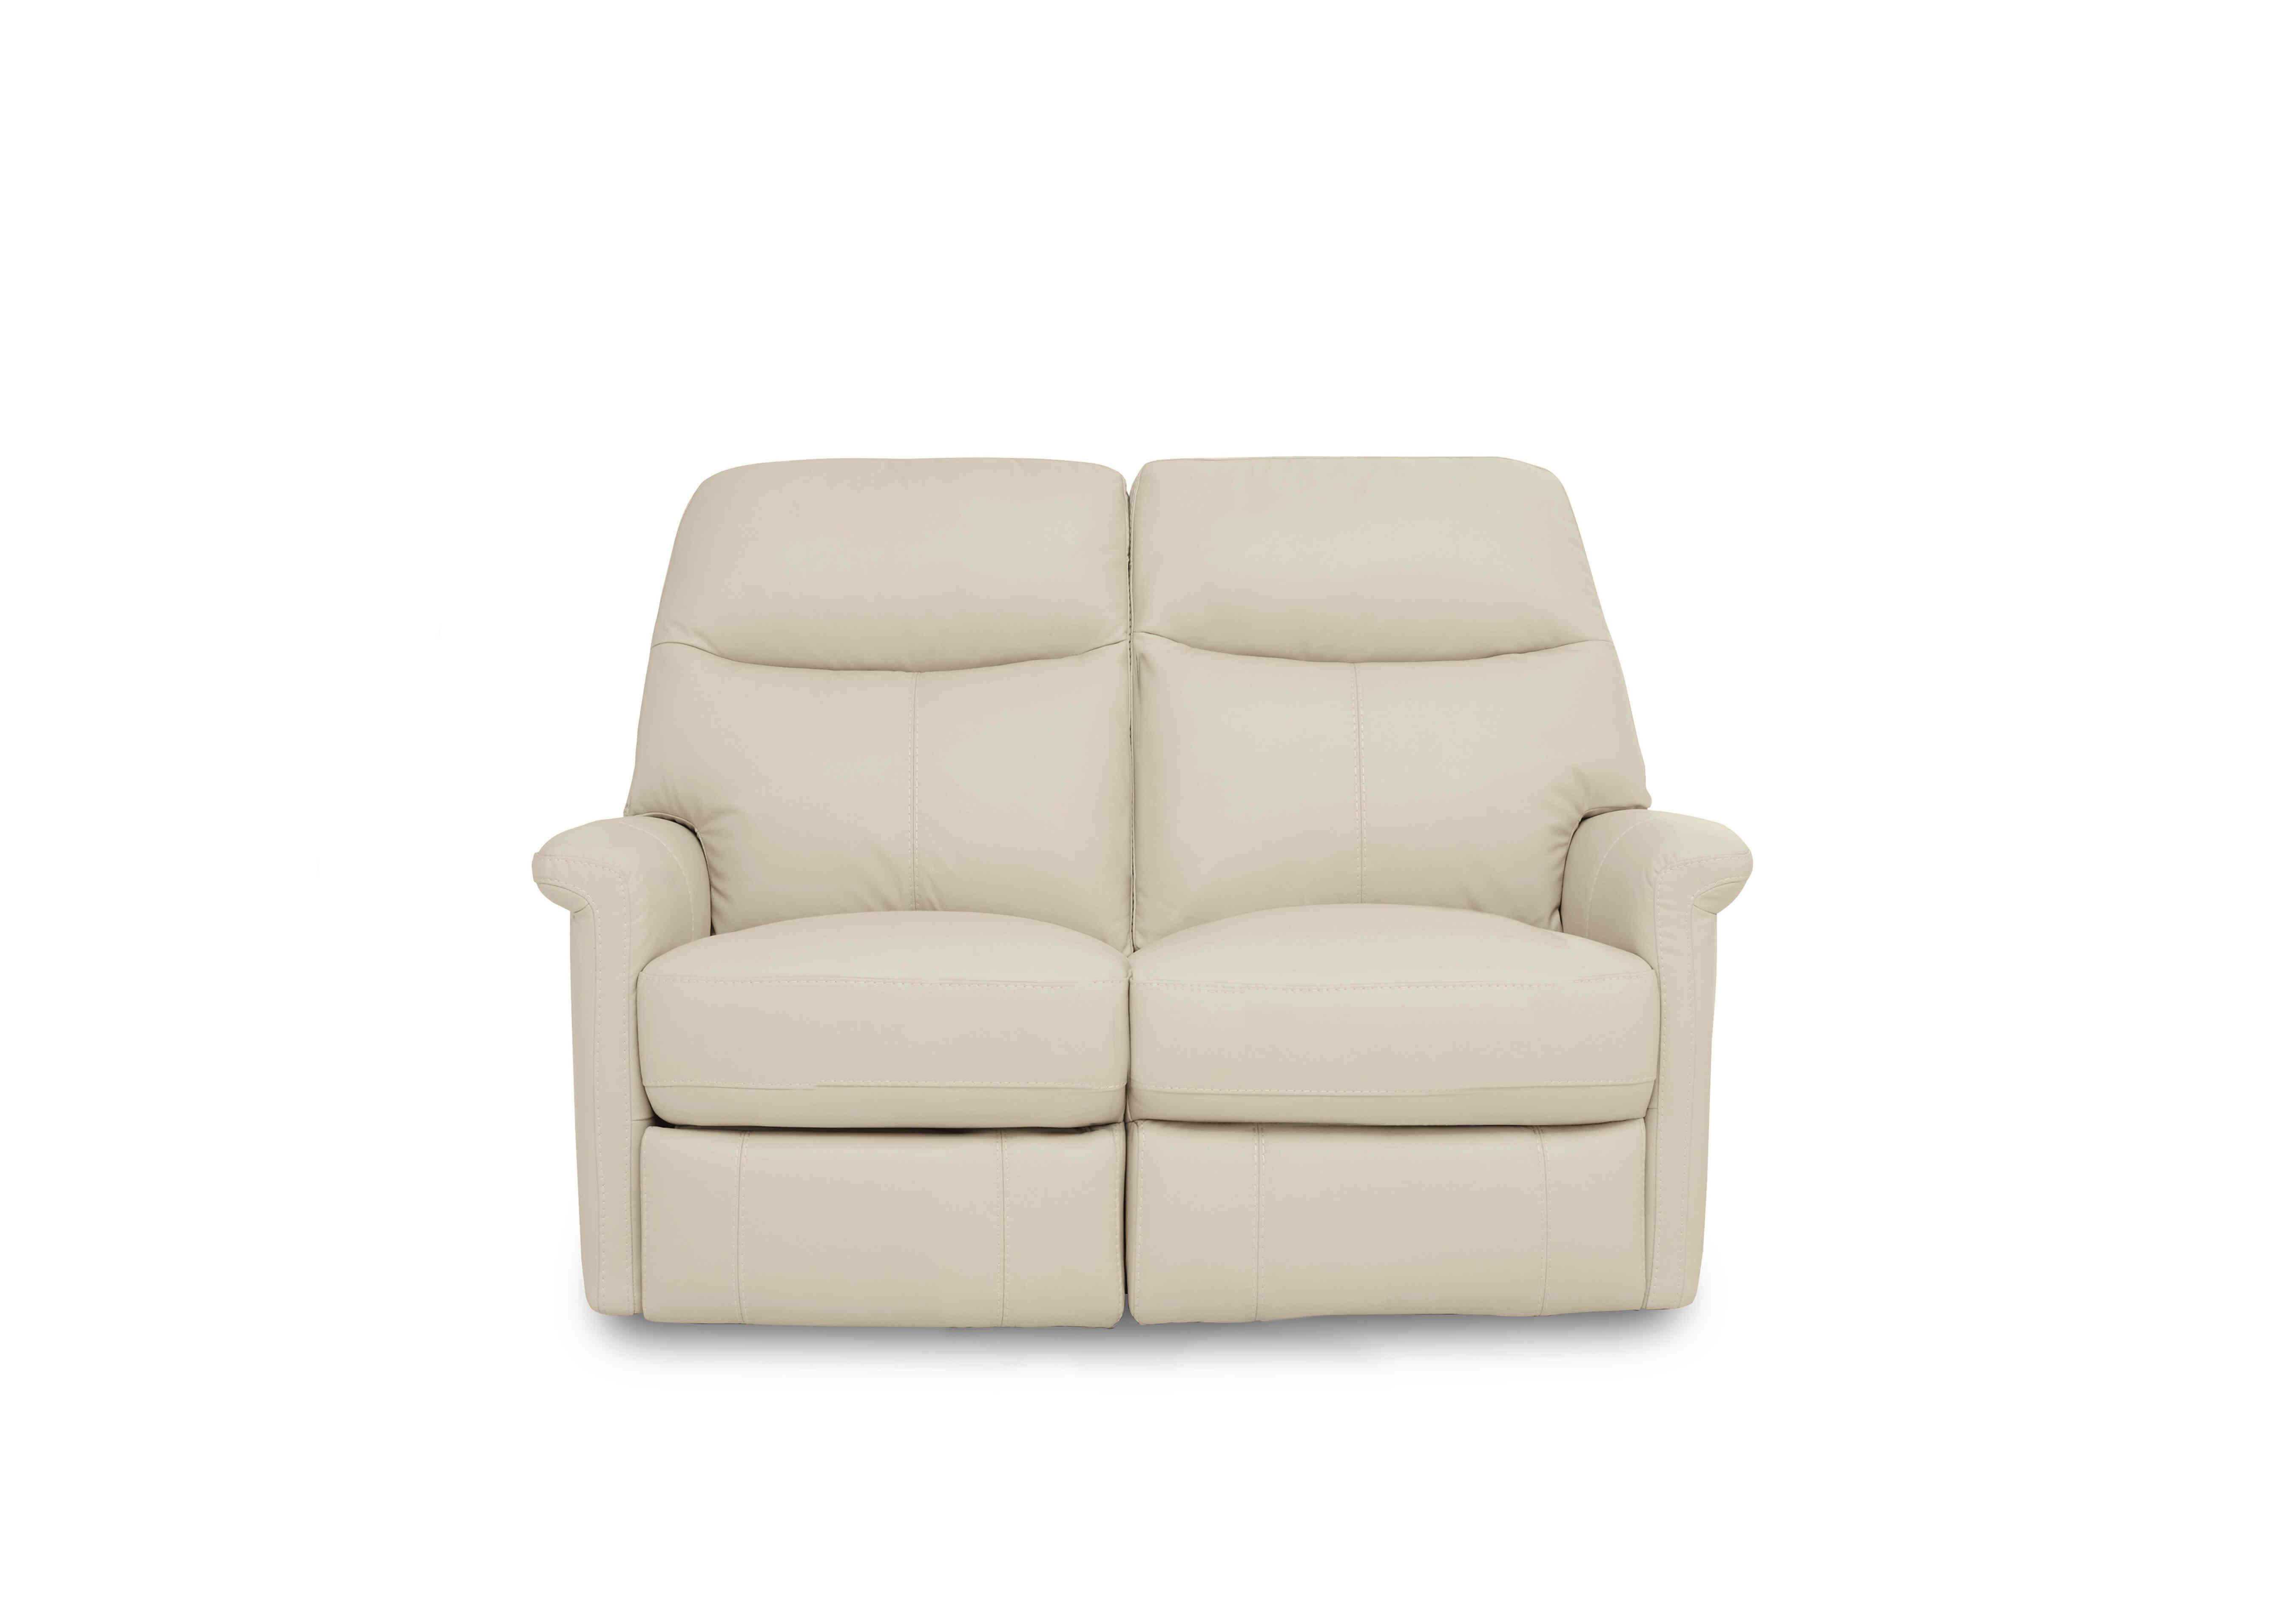 Compact Collection Lille 2 Seater Leather Sofa in Bv-862c Bisque on Furniture Village